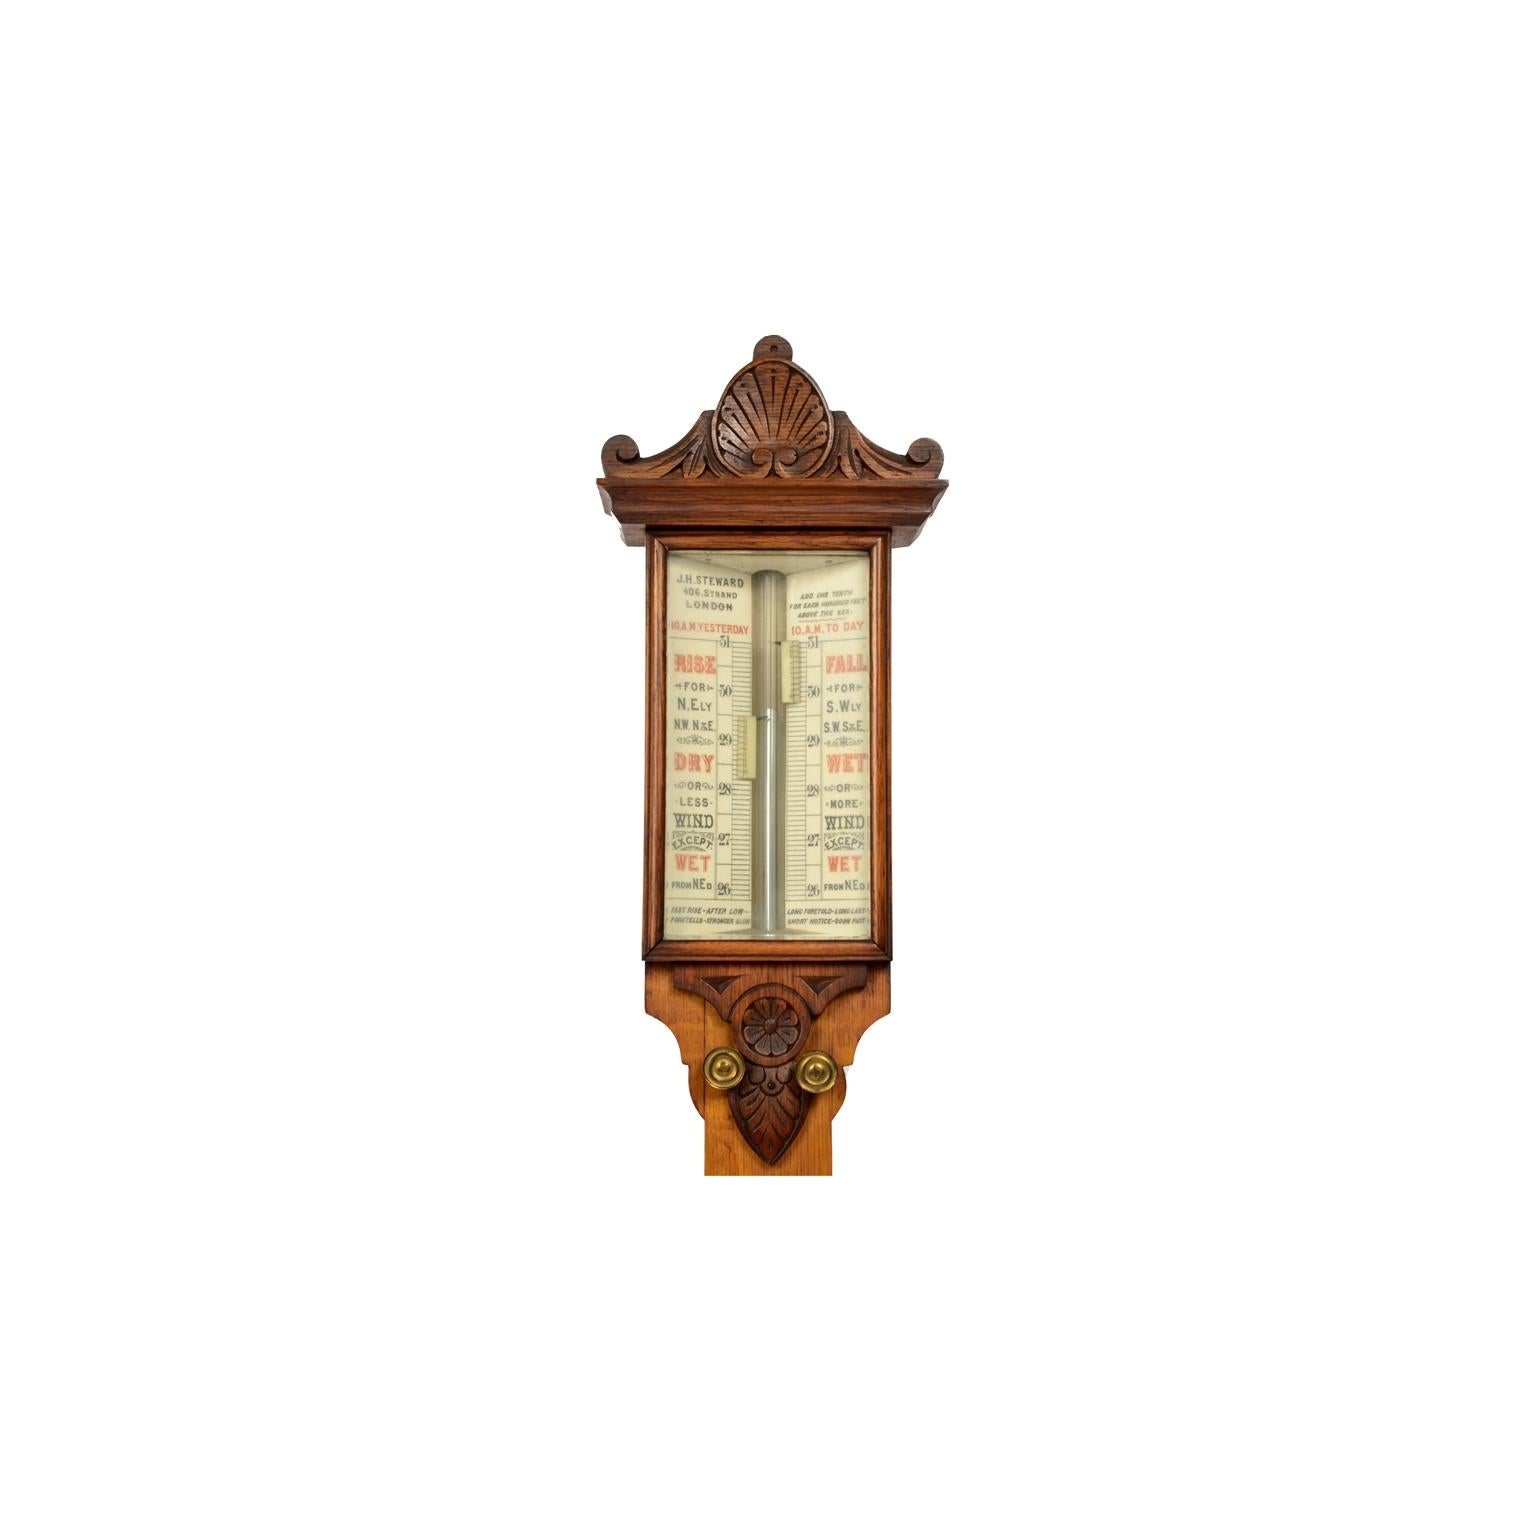 Late 19th Century J. H. Stewar Barometer and Thermometer Antique Weather Misure For Sale 7